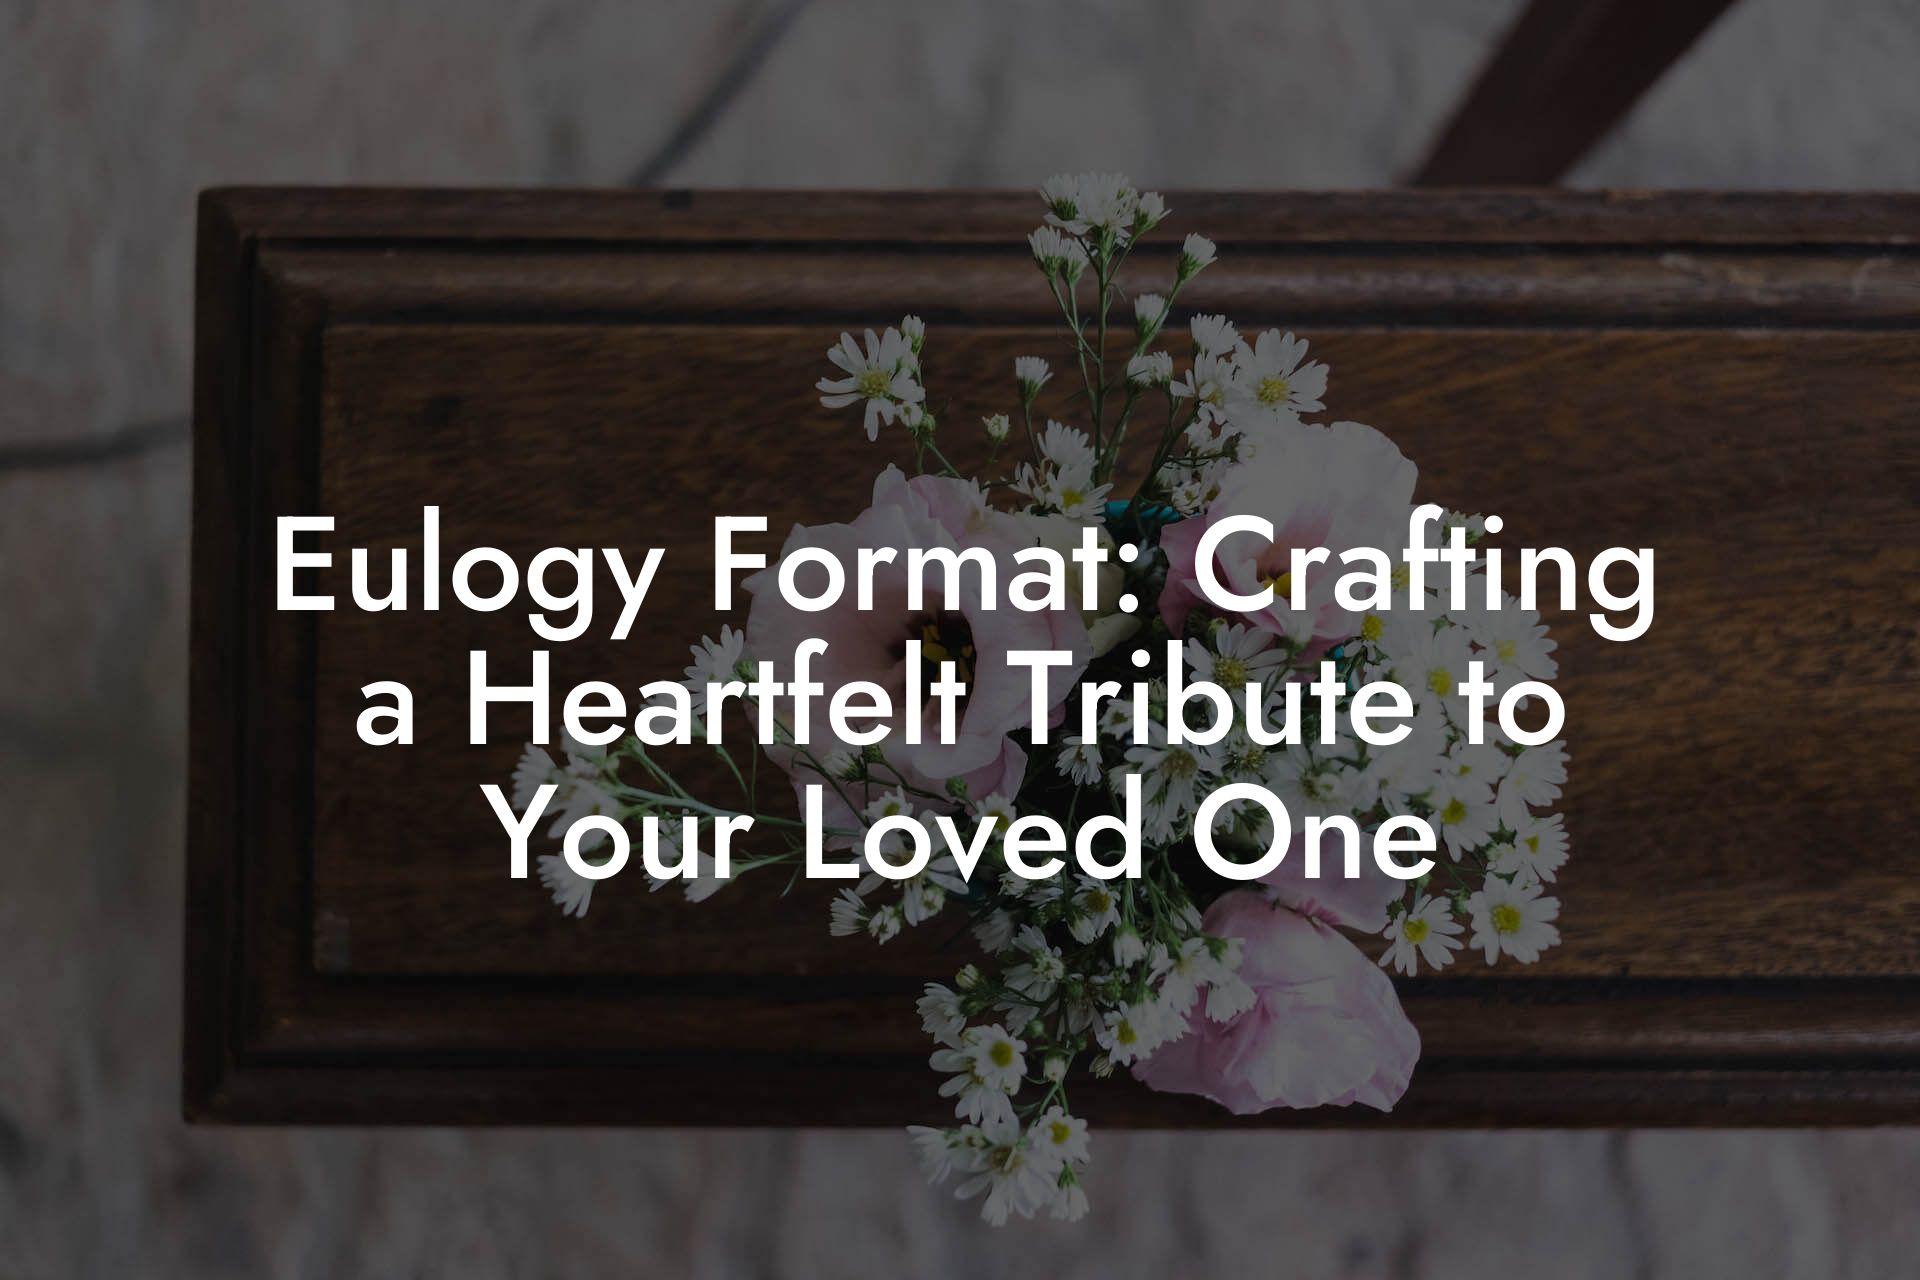 Eulogy Format: Crafting a Heartfelt Tribute to Your Loved One